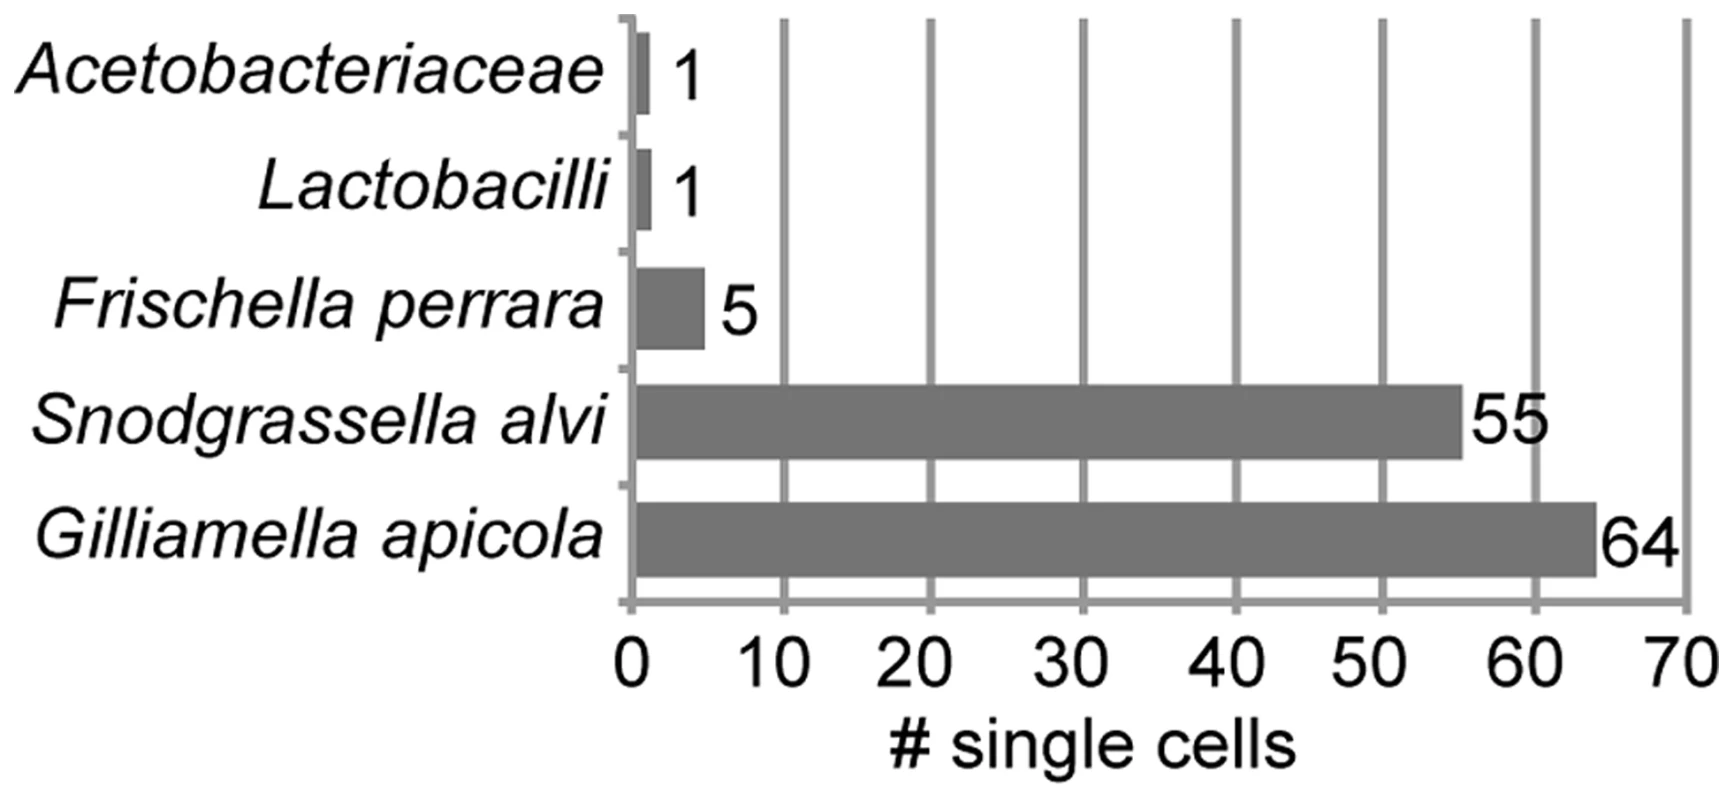 Taxonomic classification of 126 bacterial cells sorted from midguts and ileums of honey bees.